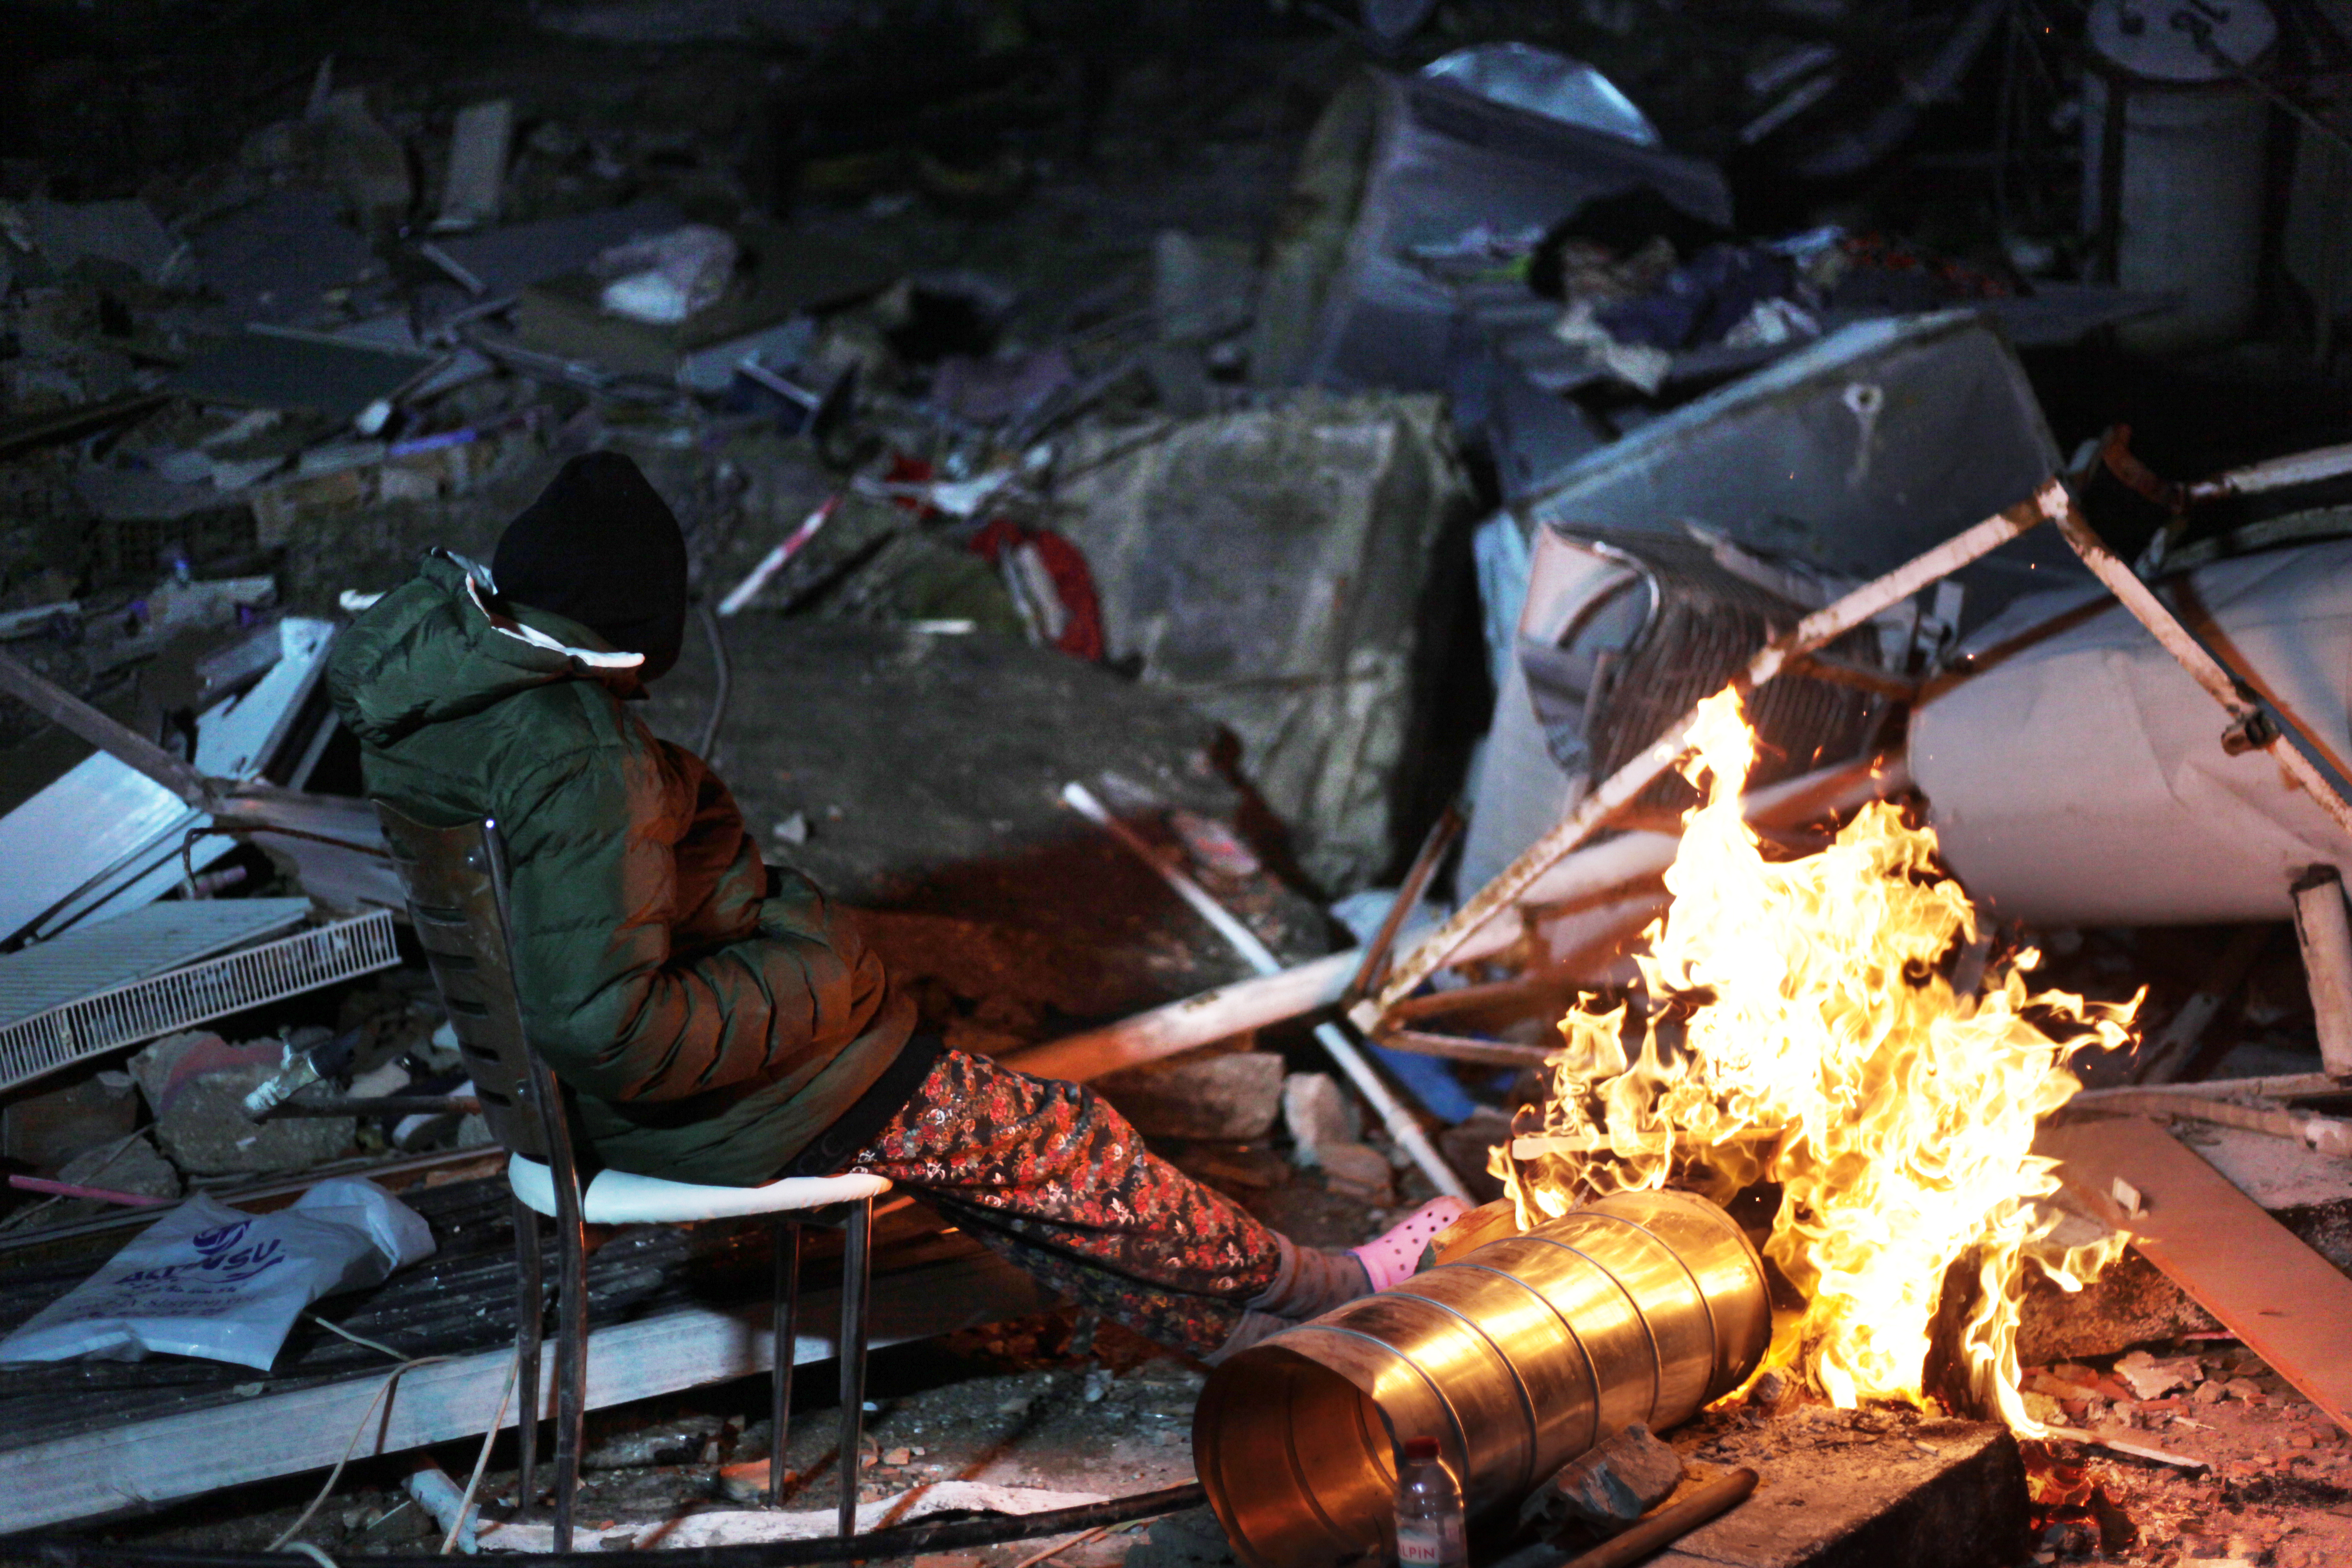 A survivor of the earthquakes warms up by the fire in Hatay. Photo: Özge Ergin.